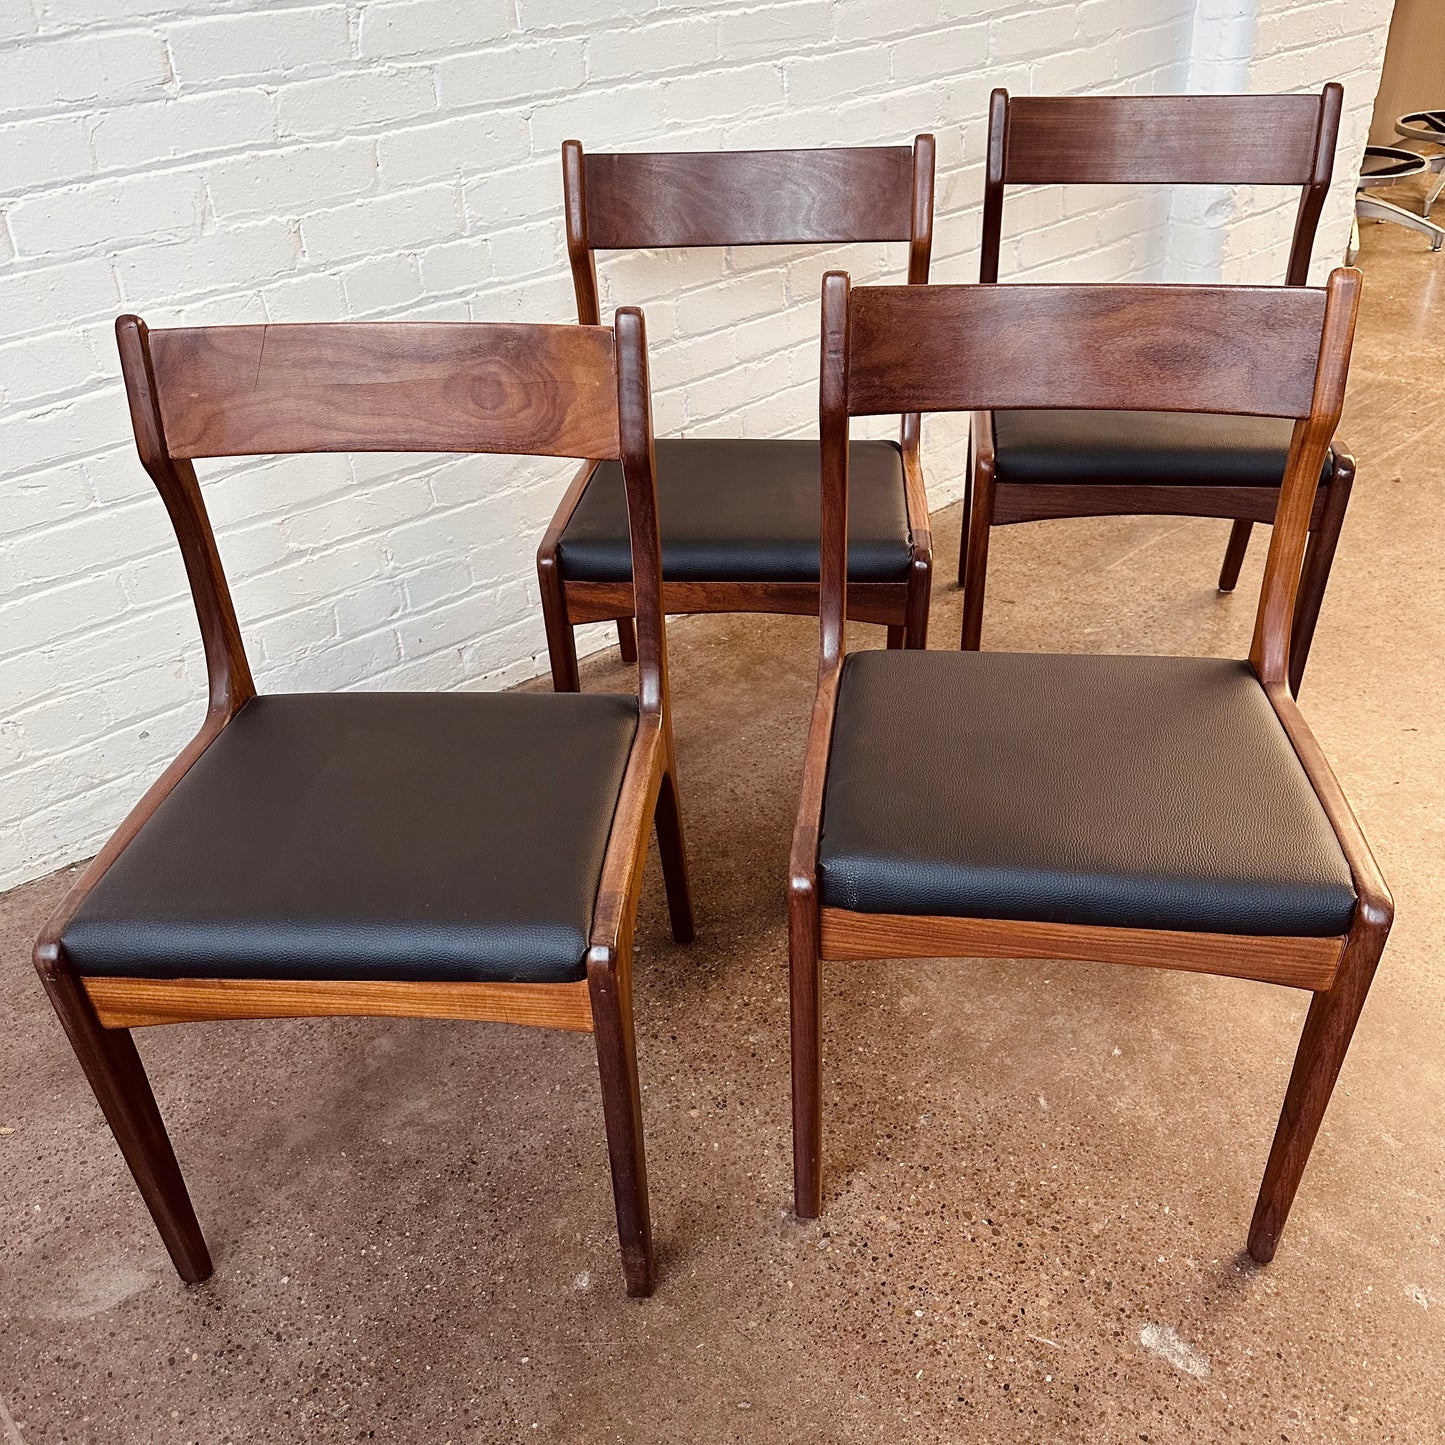 R HUBER TEAK DINING CHAIRS - SET OF FOUR